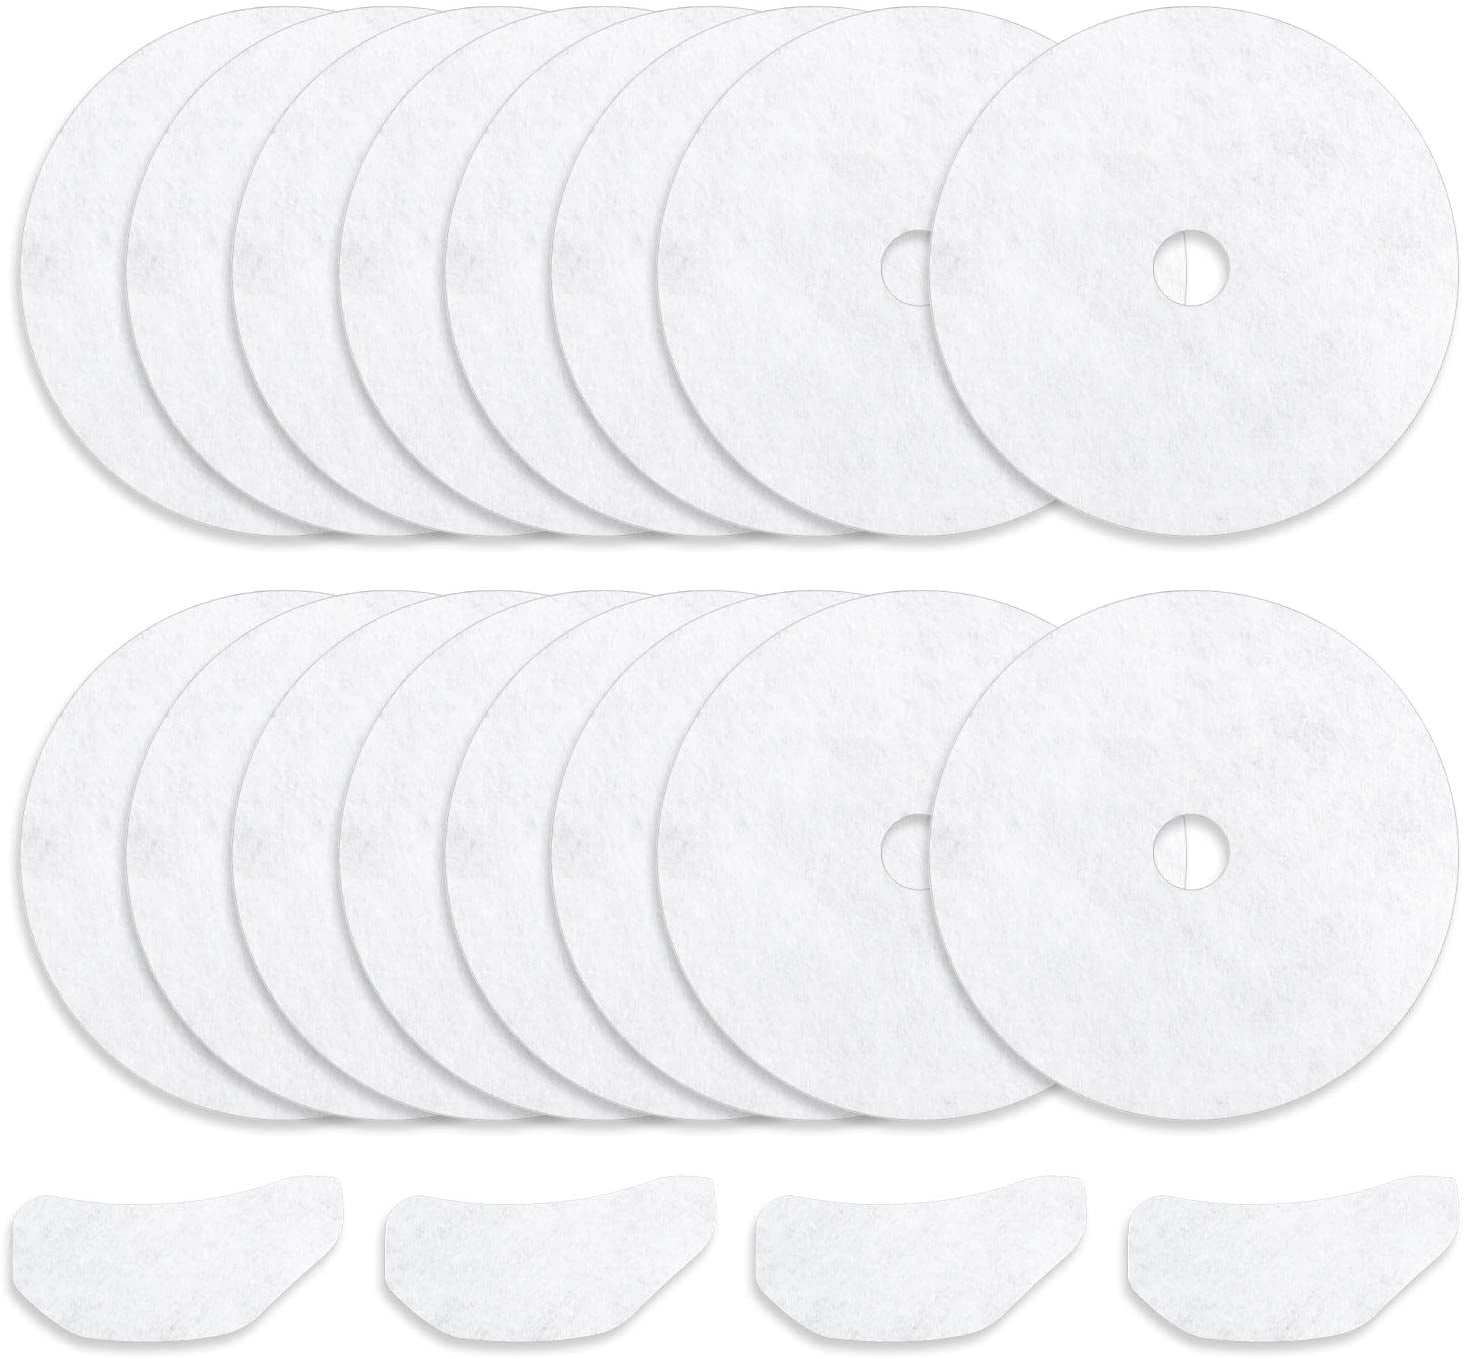 20 Pieces Cloth Dryer Exhaust Filters Compatible with Sonya Panda Magic Chef and Avant Dryers 